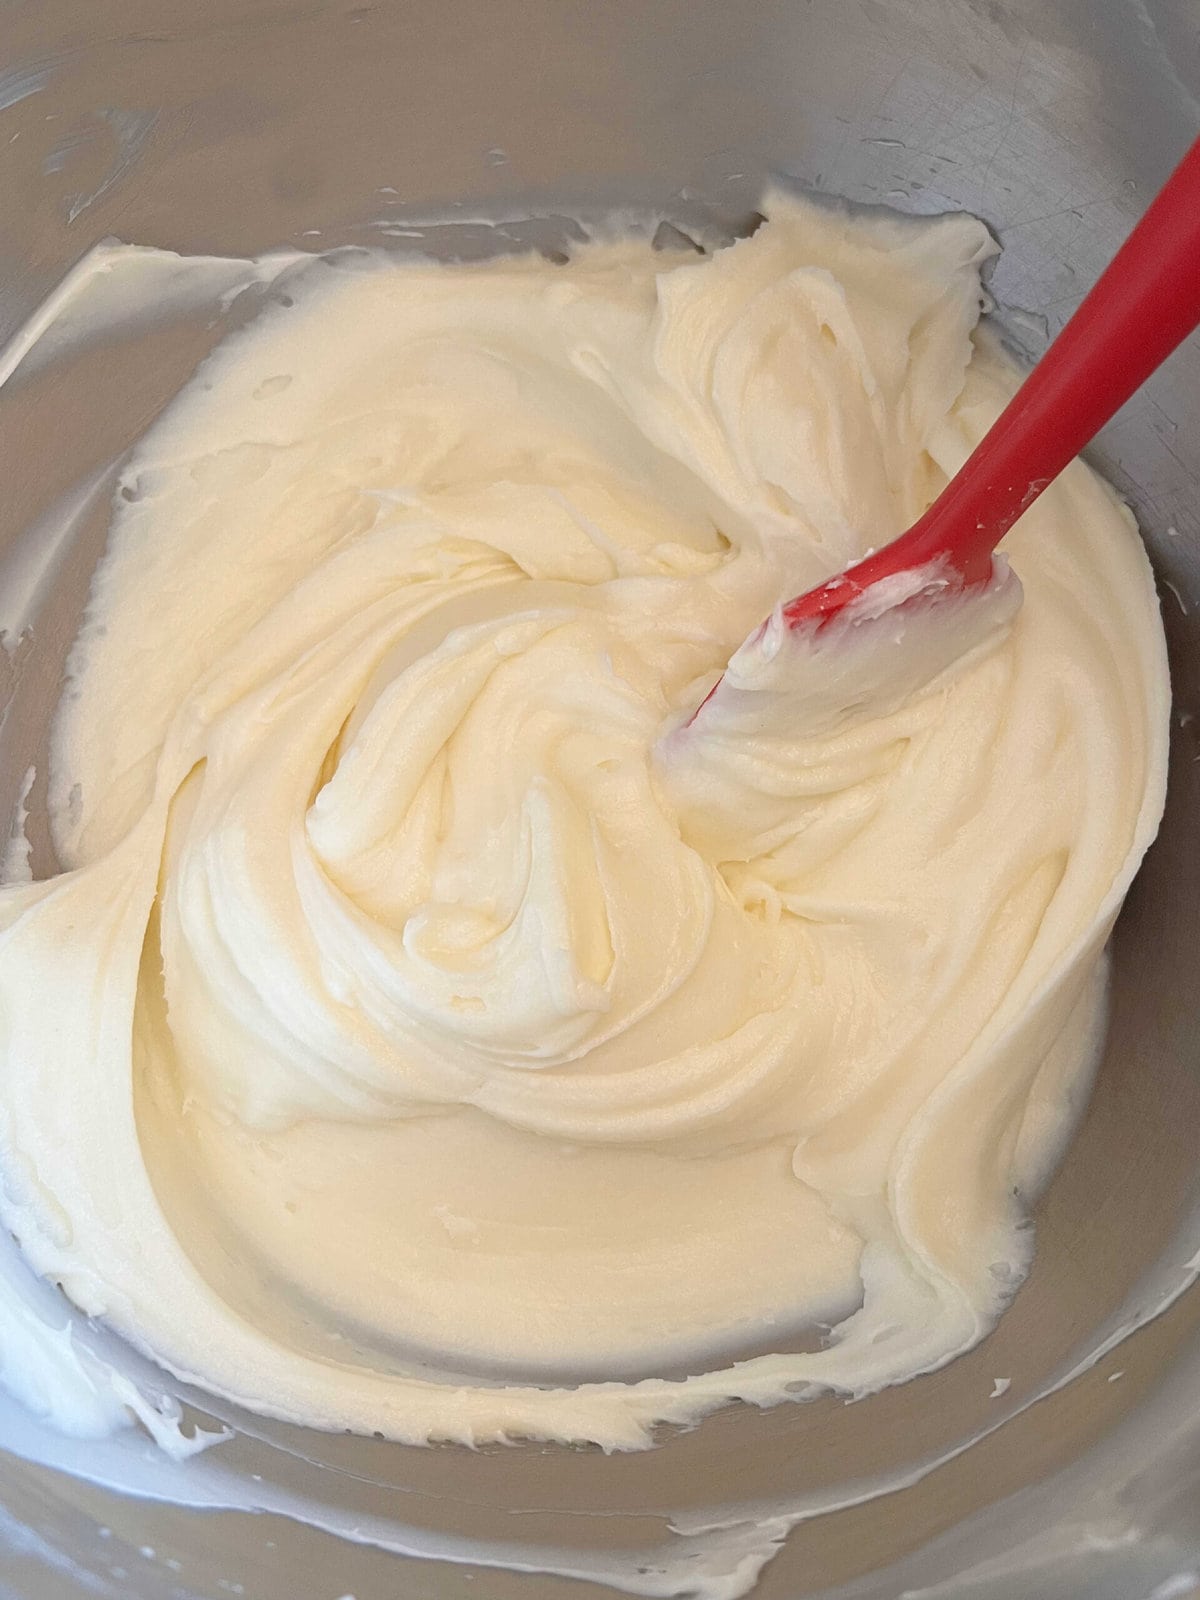 Cream Cheese Frosting, in a mixing bowl with red spatula.